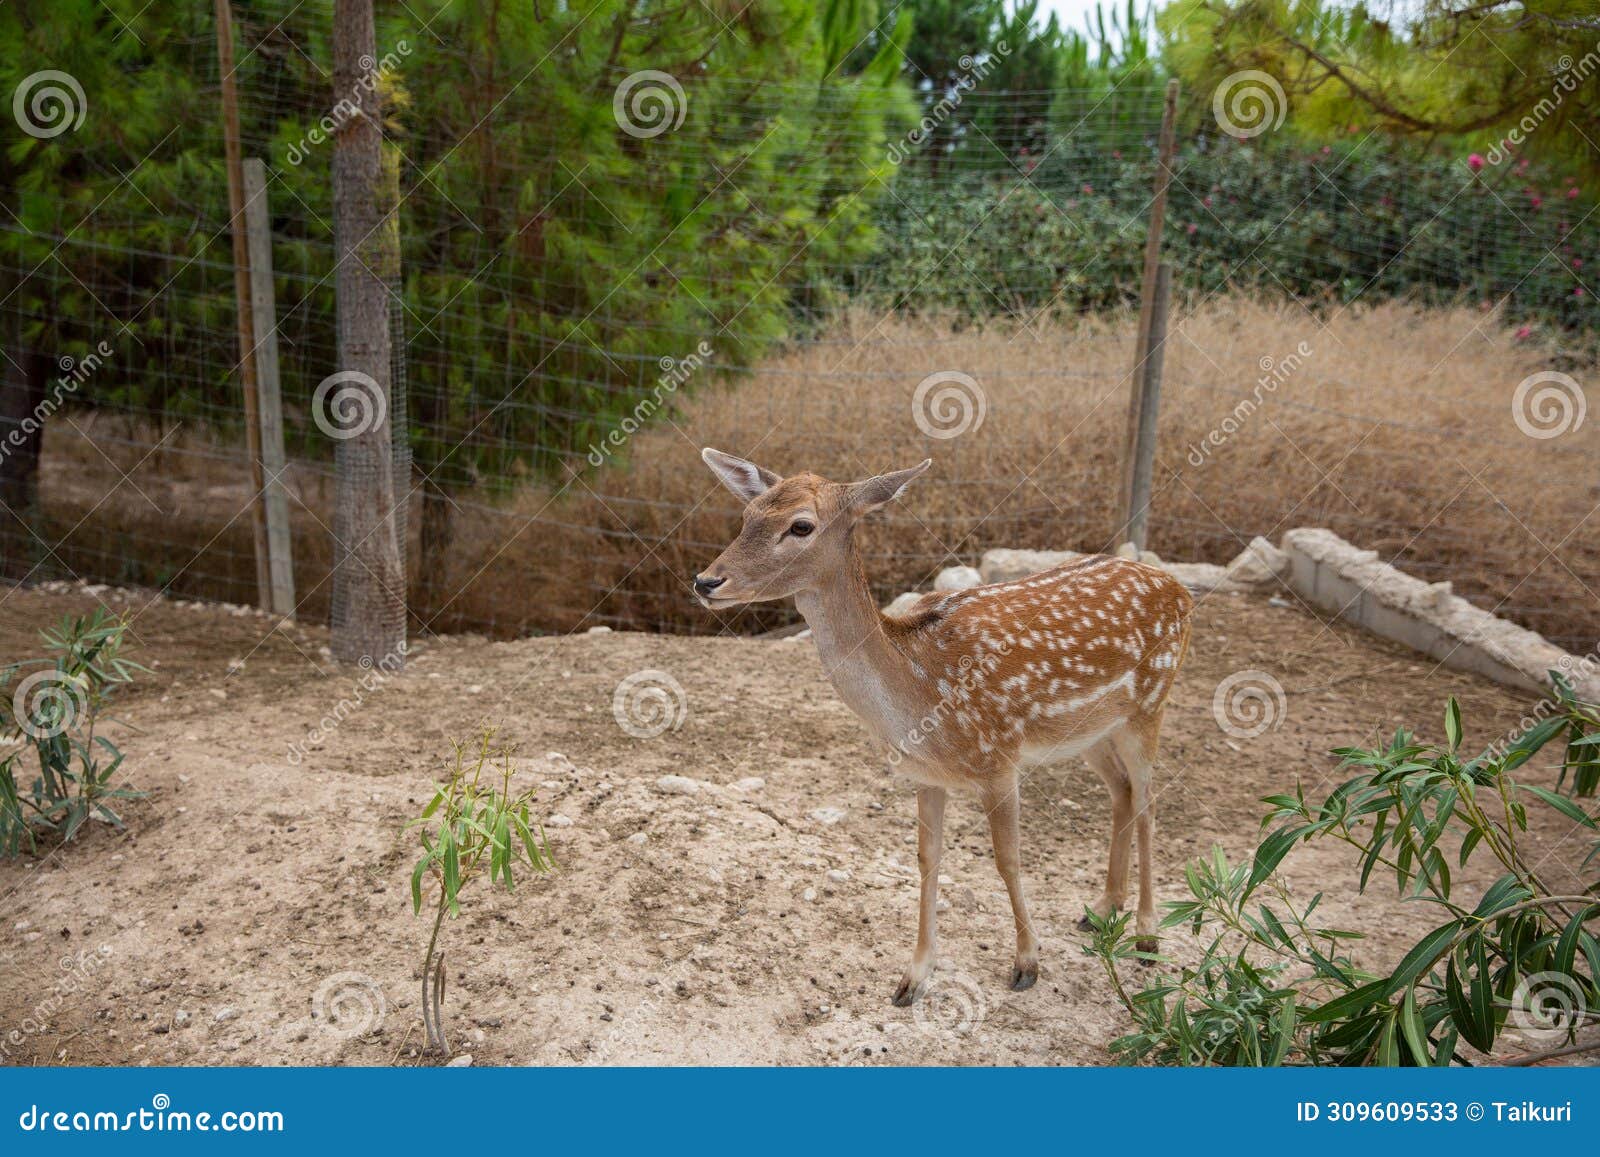 spotted deer in the zoo. the deer is in the park. terra natura.